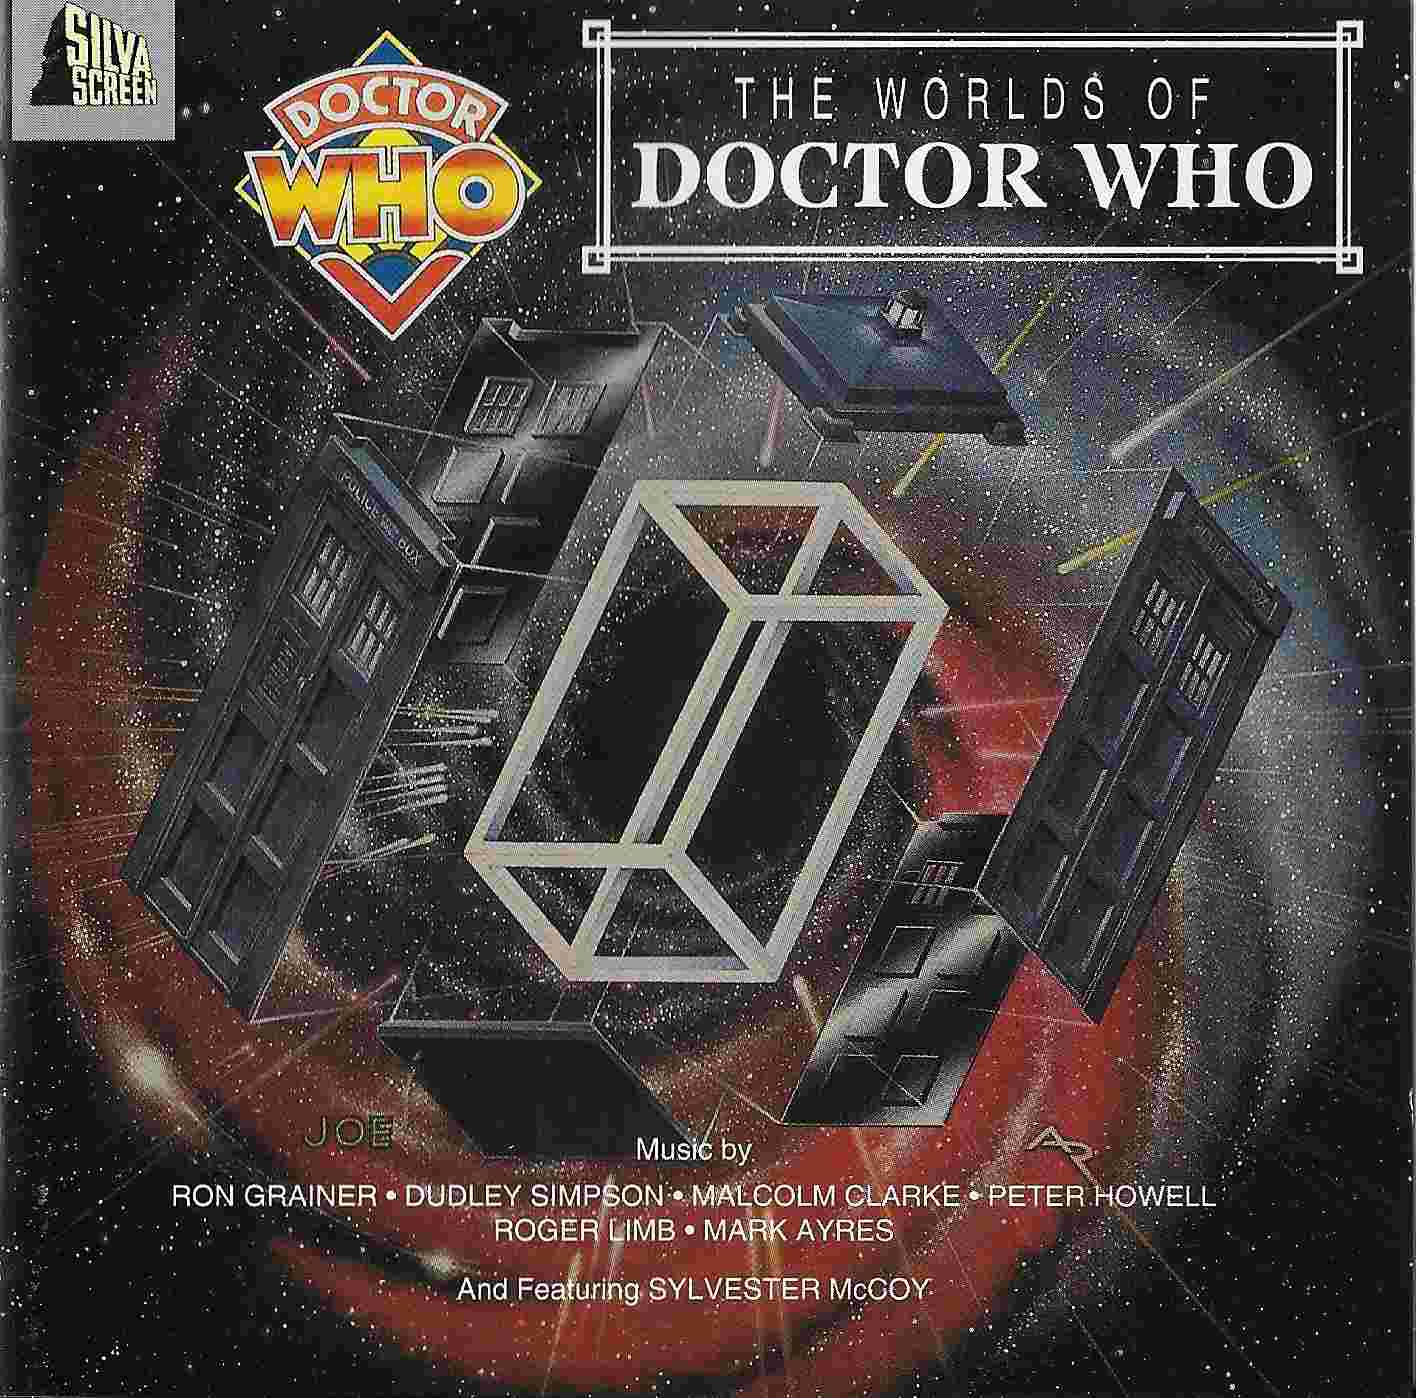 Picture of FILMCD 715 The Worlds of doctor who by artist Various from the BBC records and Tapes library